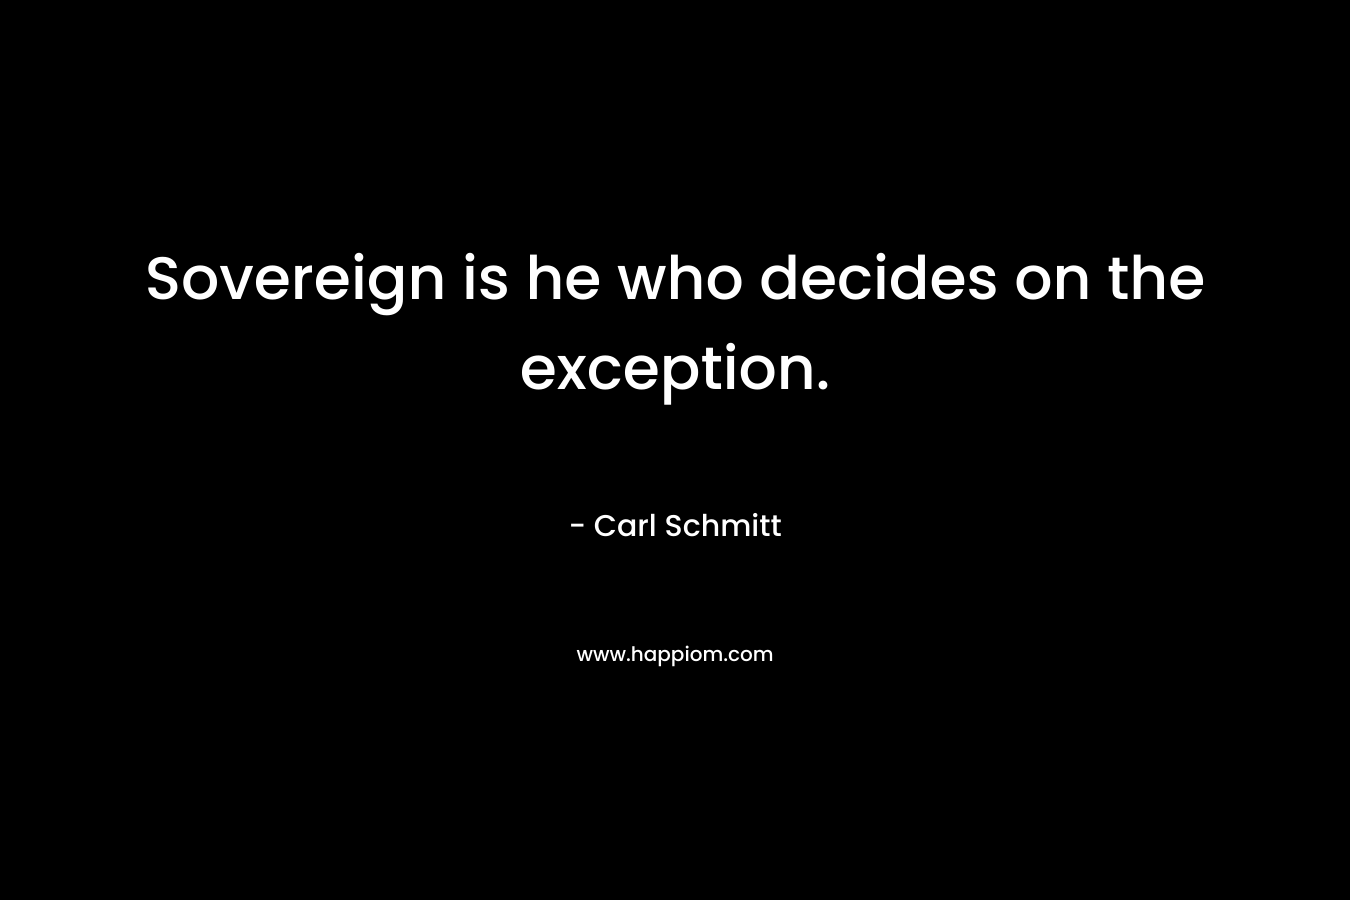 Sovereign is he who decides on the exception. – Carl Schmitt